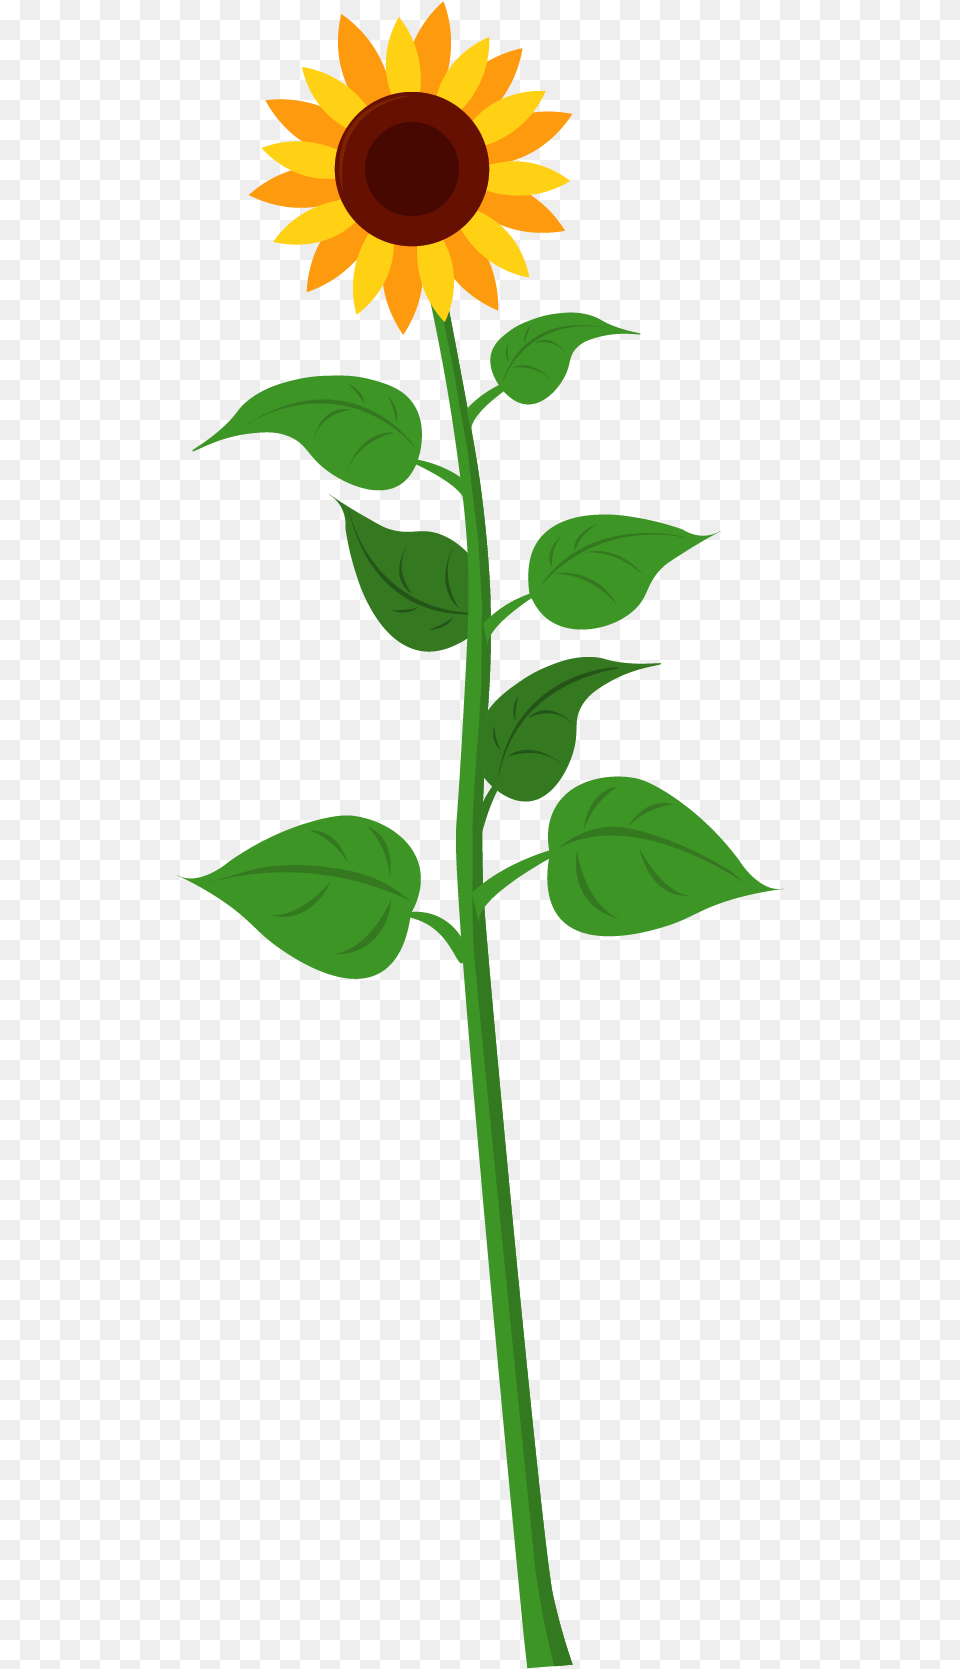 Drawn Sunflower Tall Sunflower Clip Art Of Tall Sunflower, Flower, Plant, Leaf Free Png Download